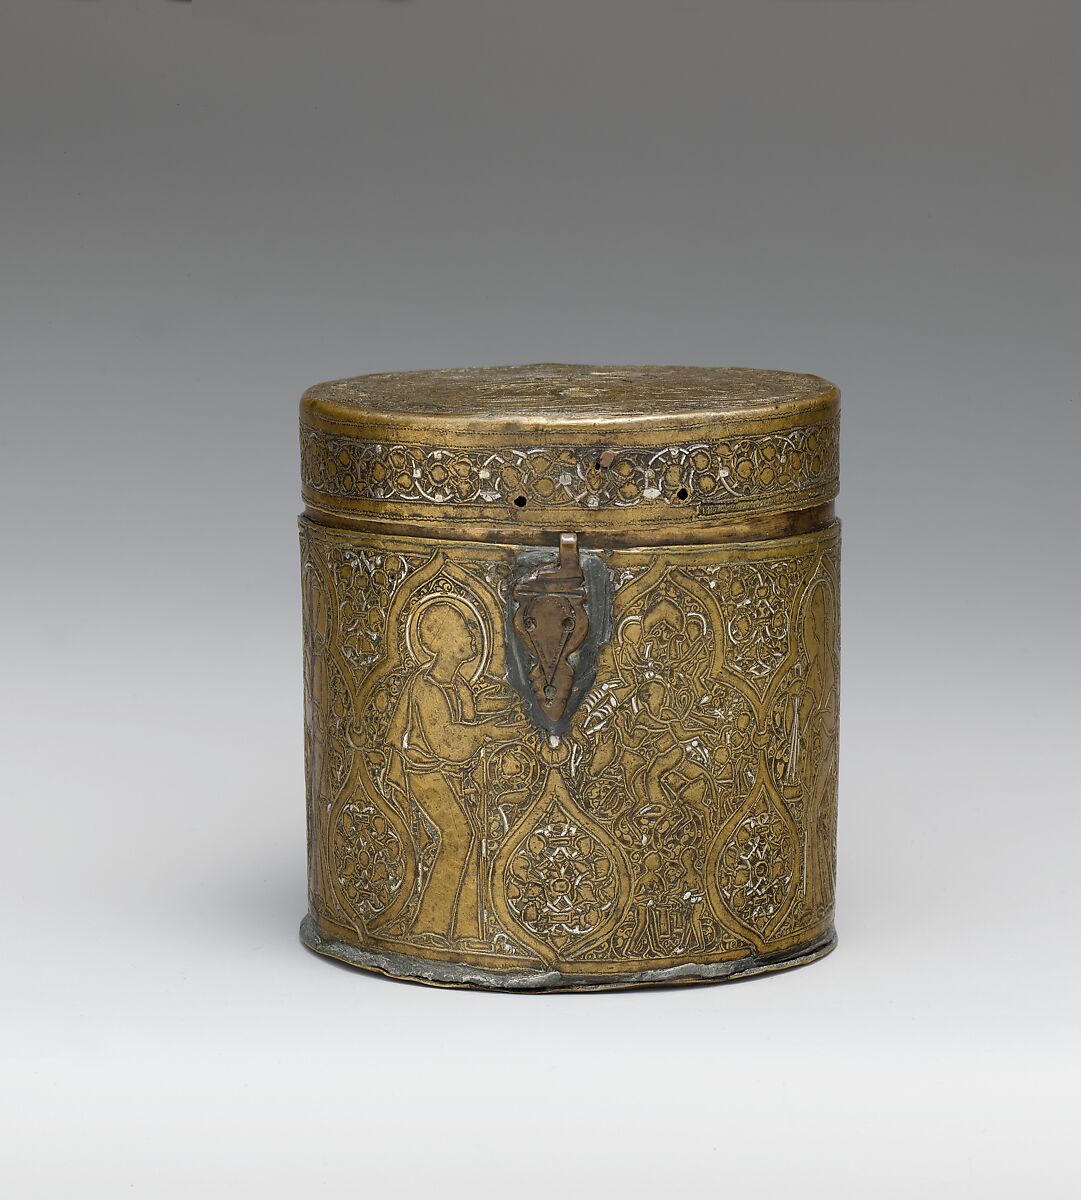 Pyxis Depicting Standing Saints or Ecclesiastics and the Entry into Jerusalem with Christ Riding a Donkey